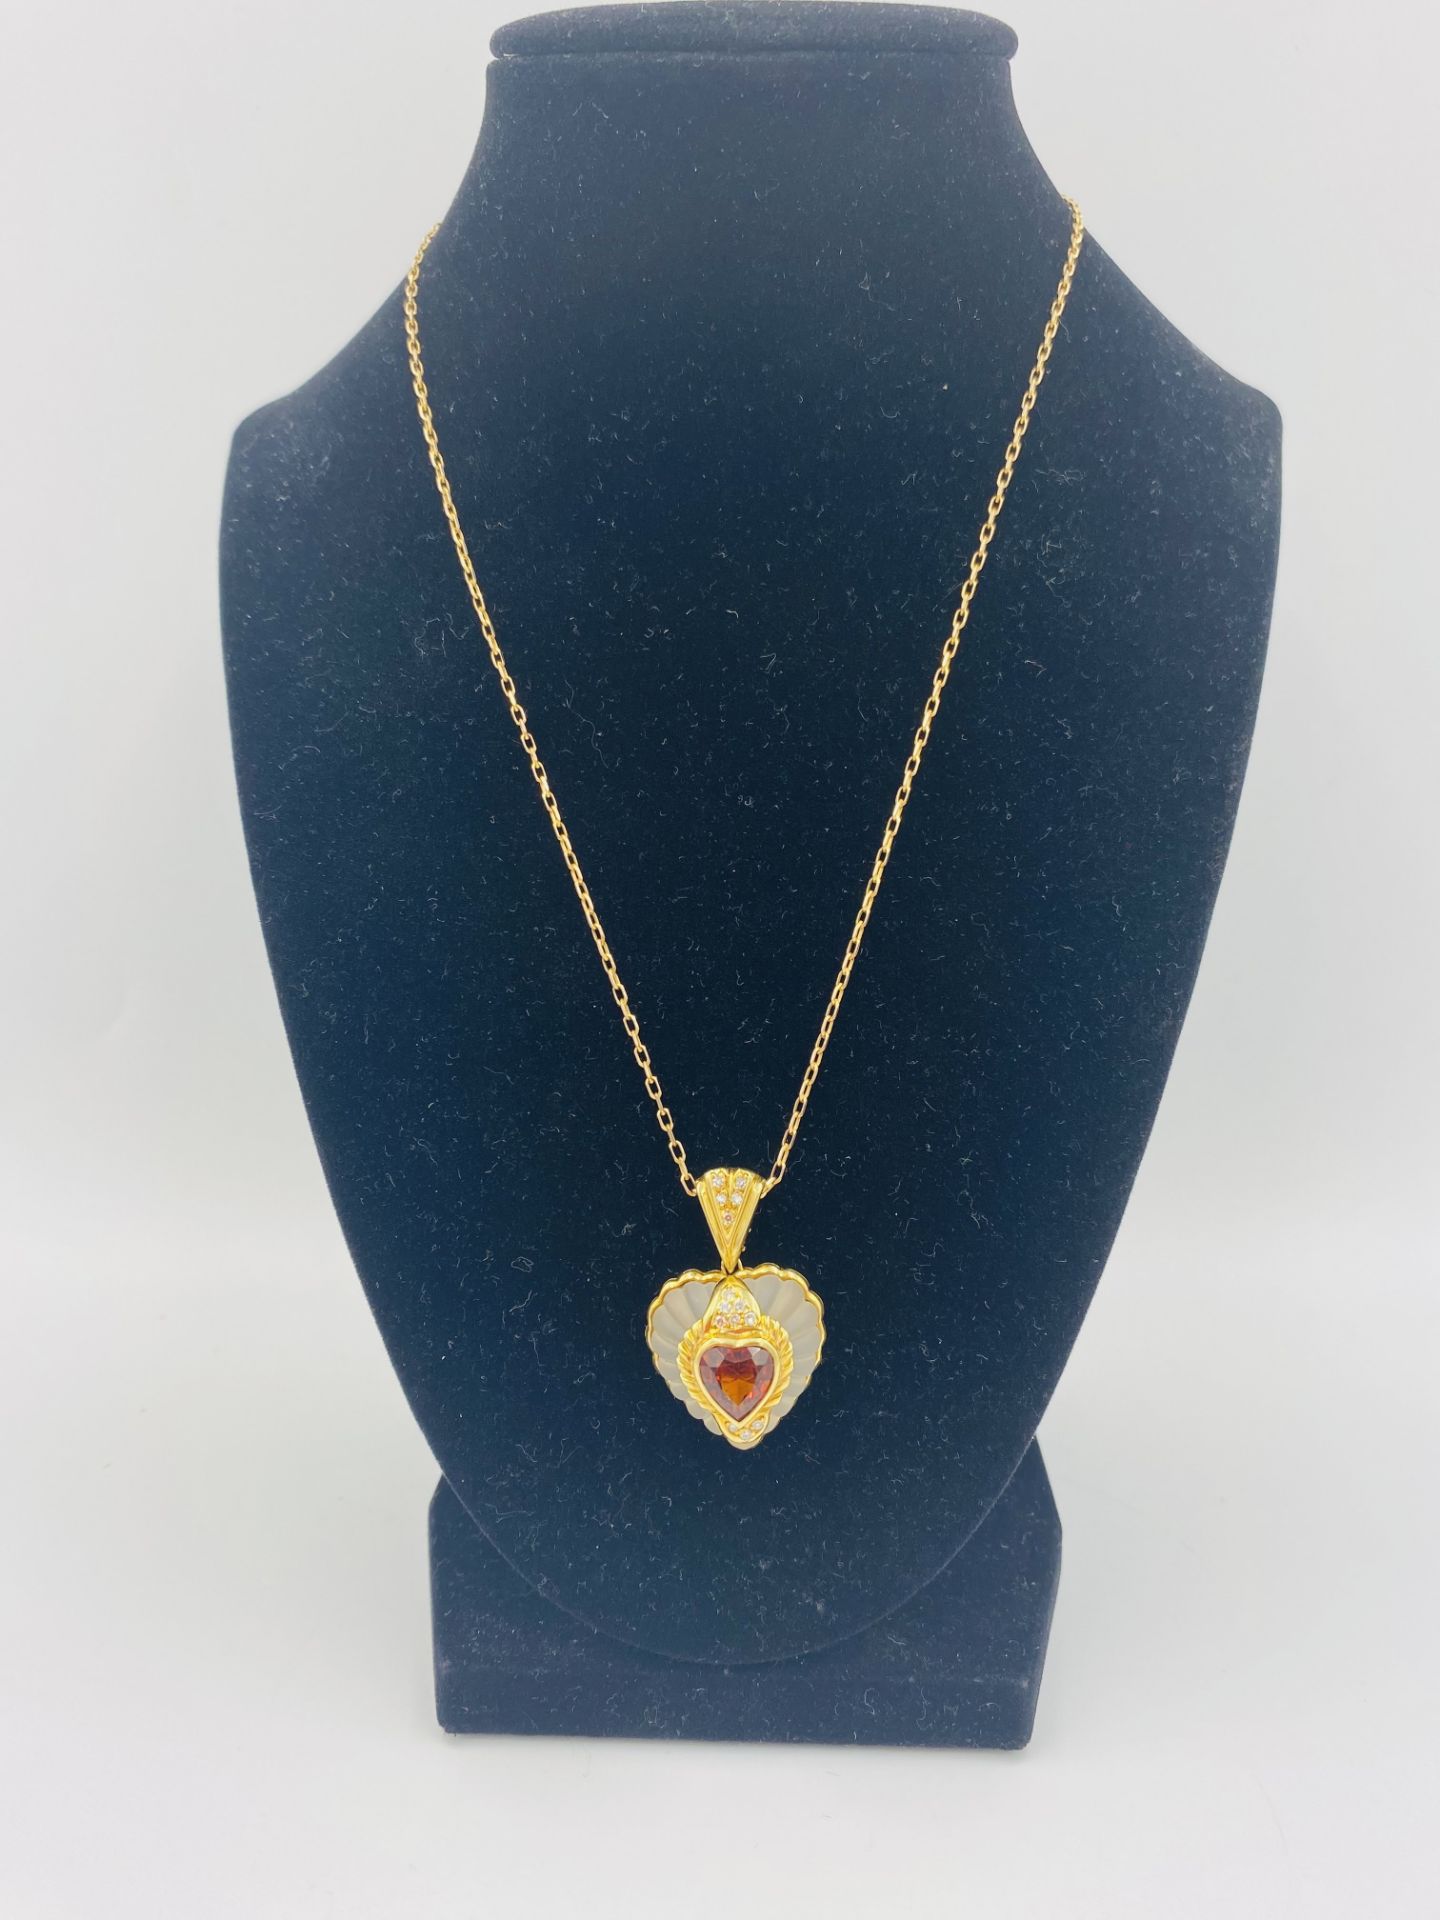 Rock crystal heart shaped pendant with 18ct gold mount - Bild 2 aus 6